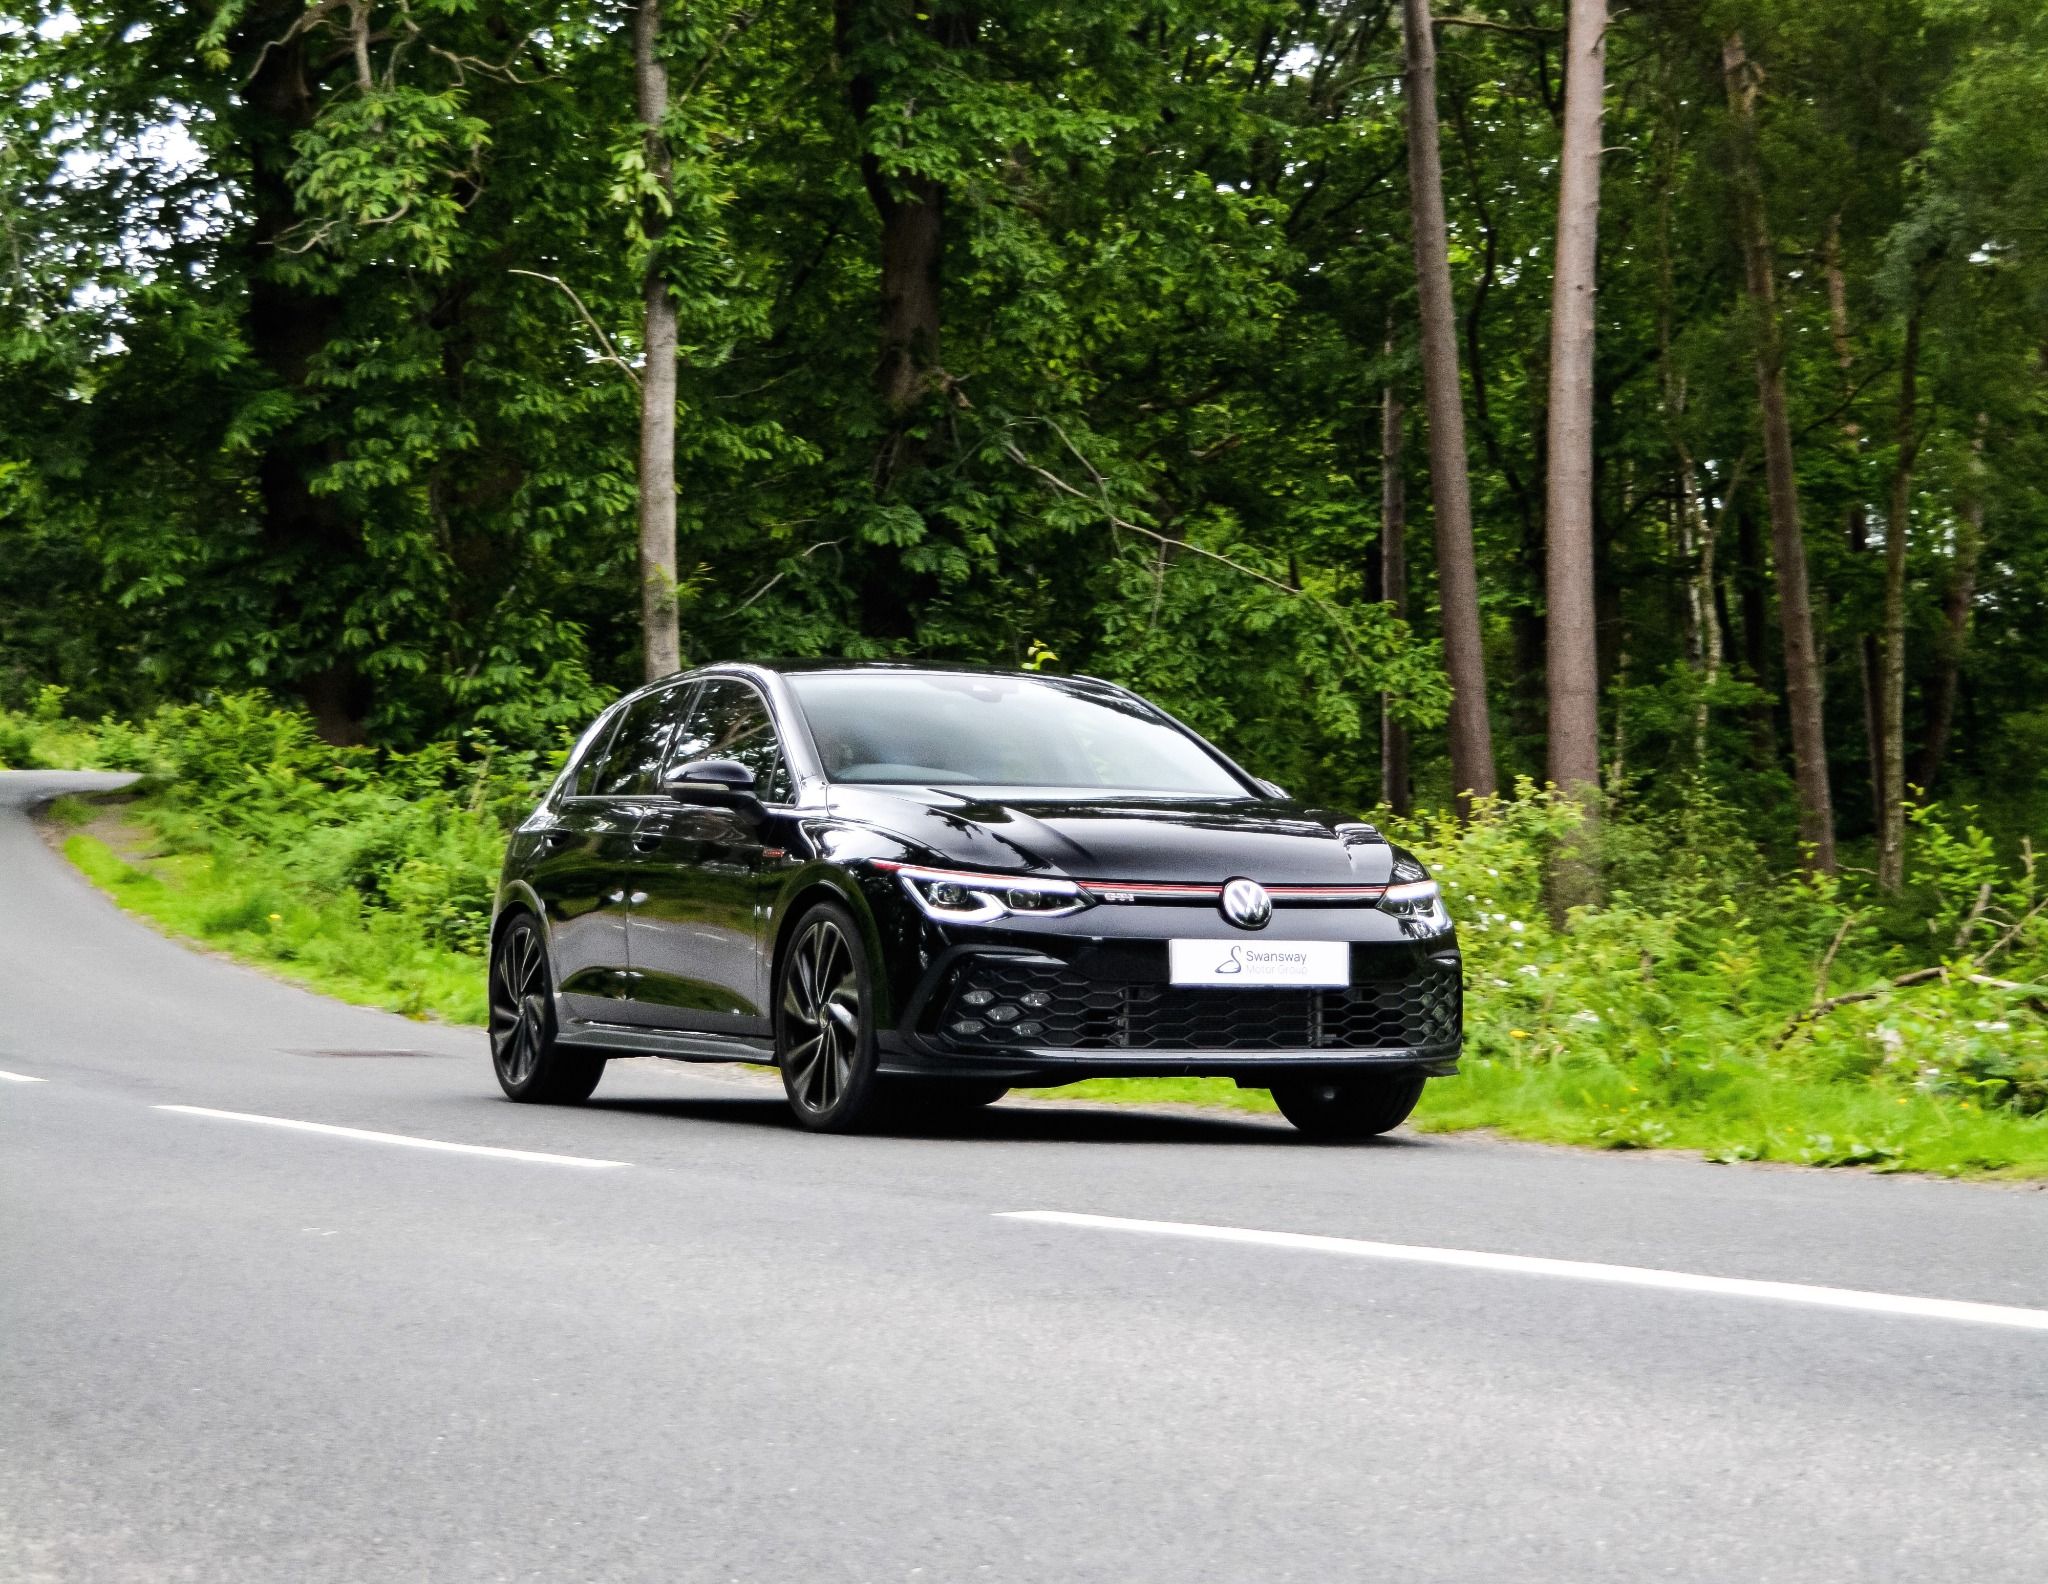 Black Golf GTI driving on road in a wooded area